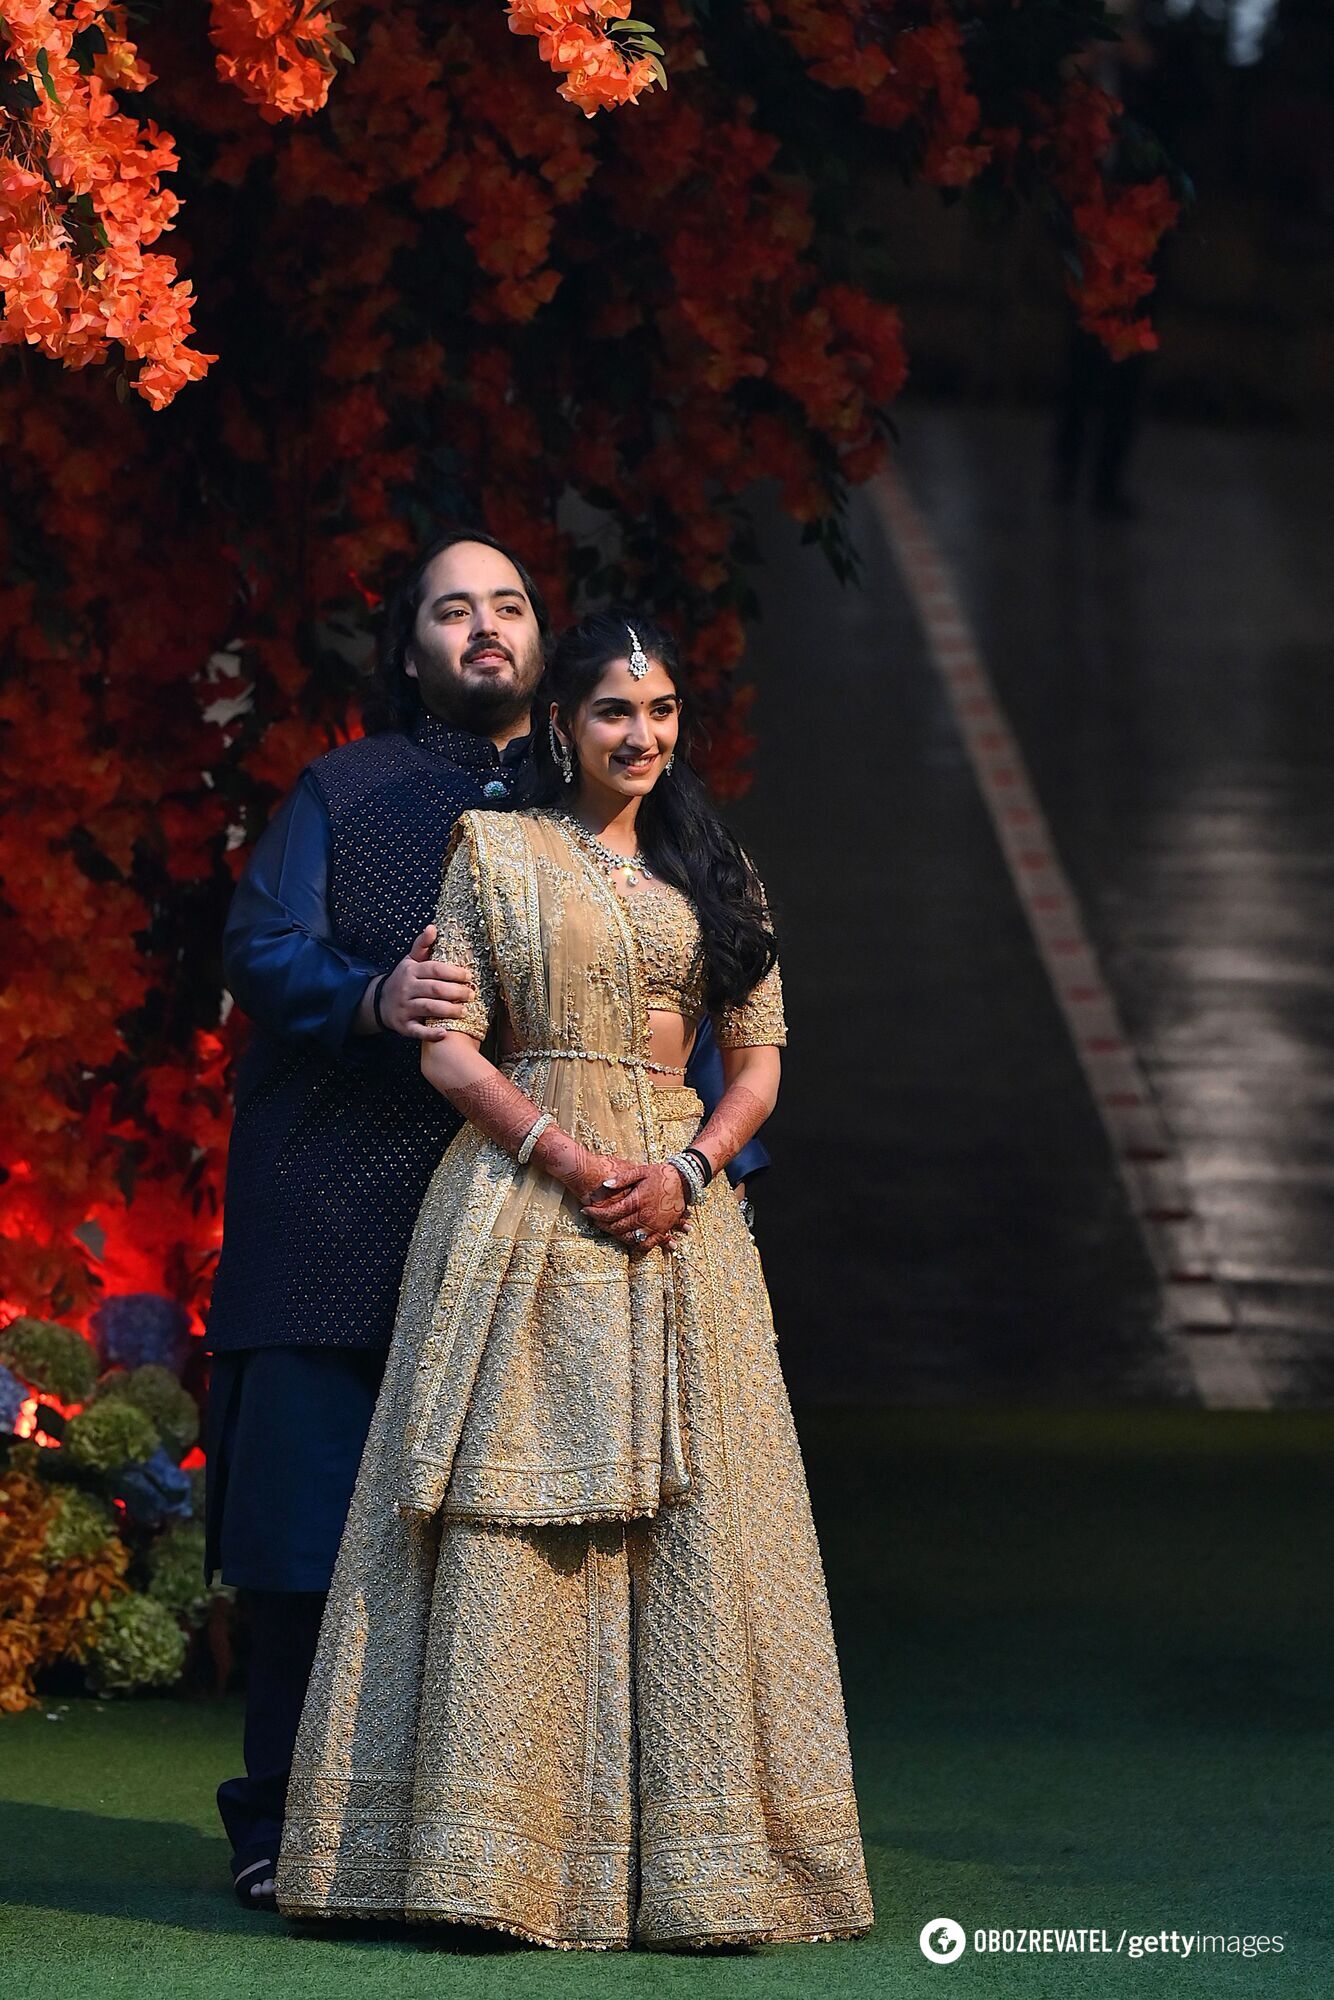 The wedding of the year in India. Billionaire Anant Ambani's bride was caught plagiarizing: she ''borrowed'' a speech from the movie Shall We Dance?